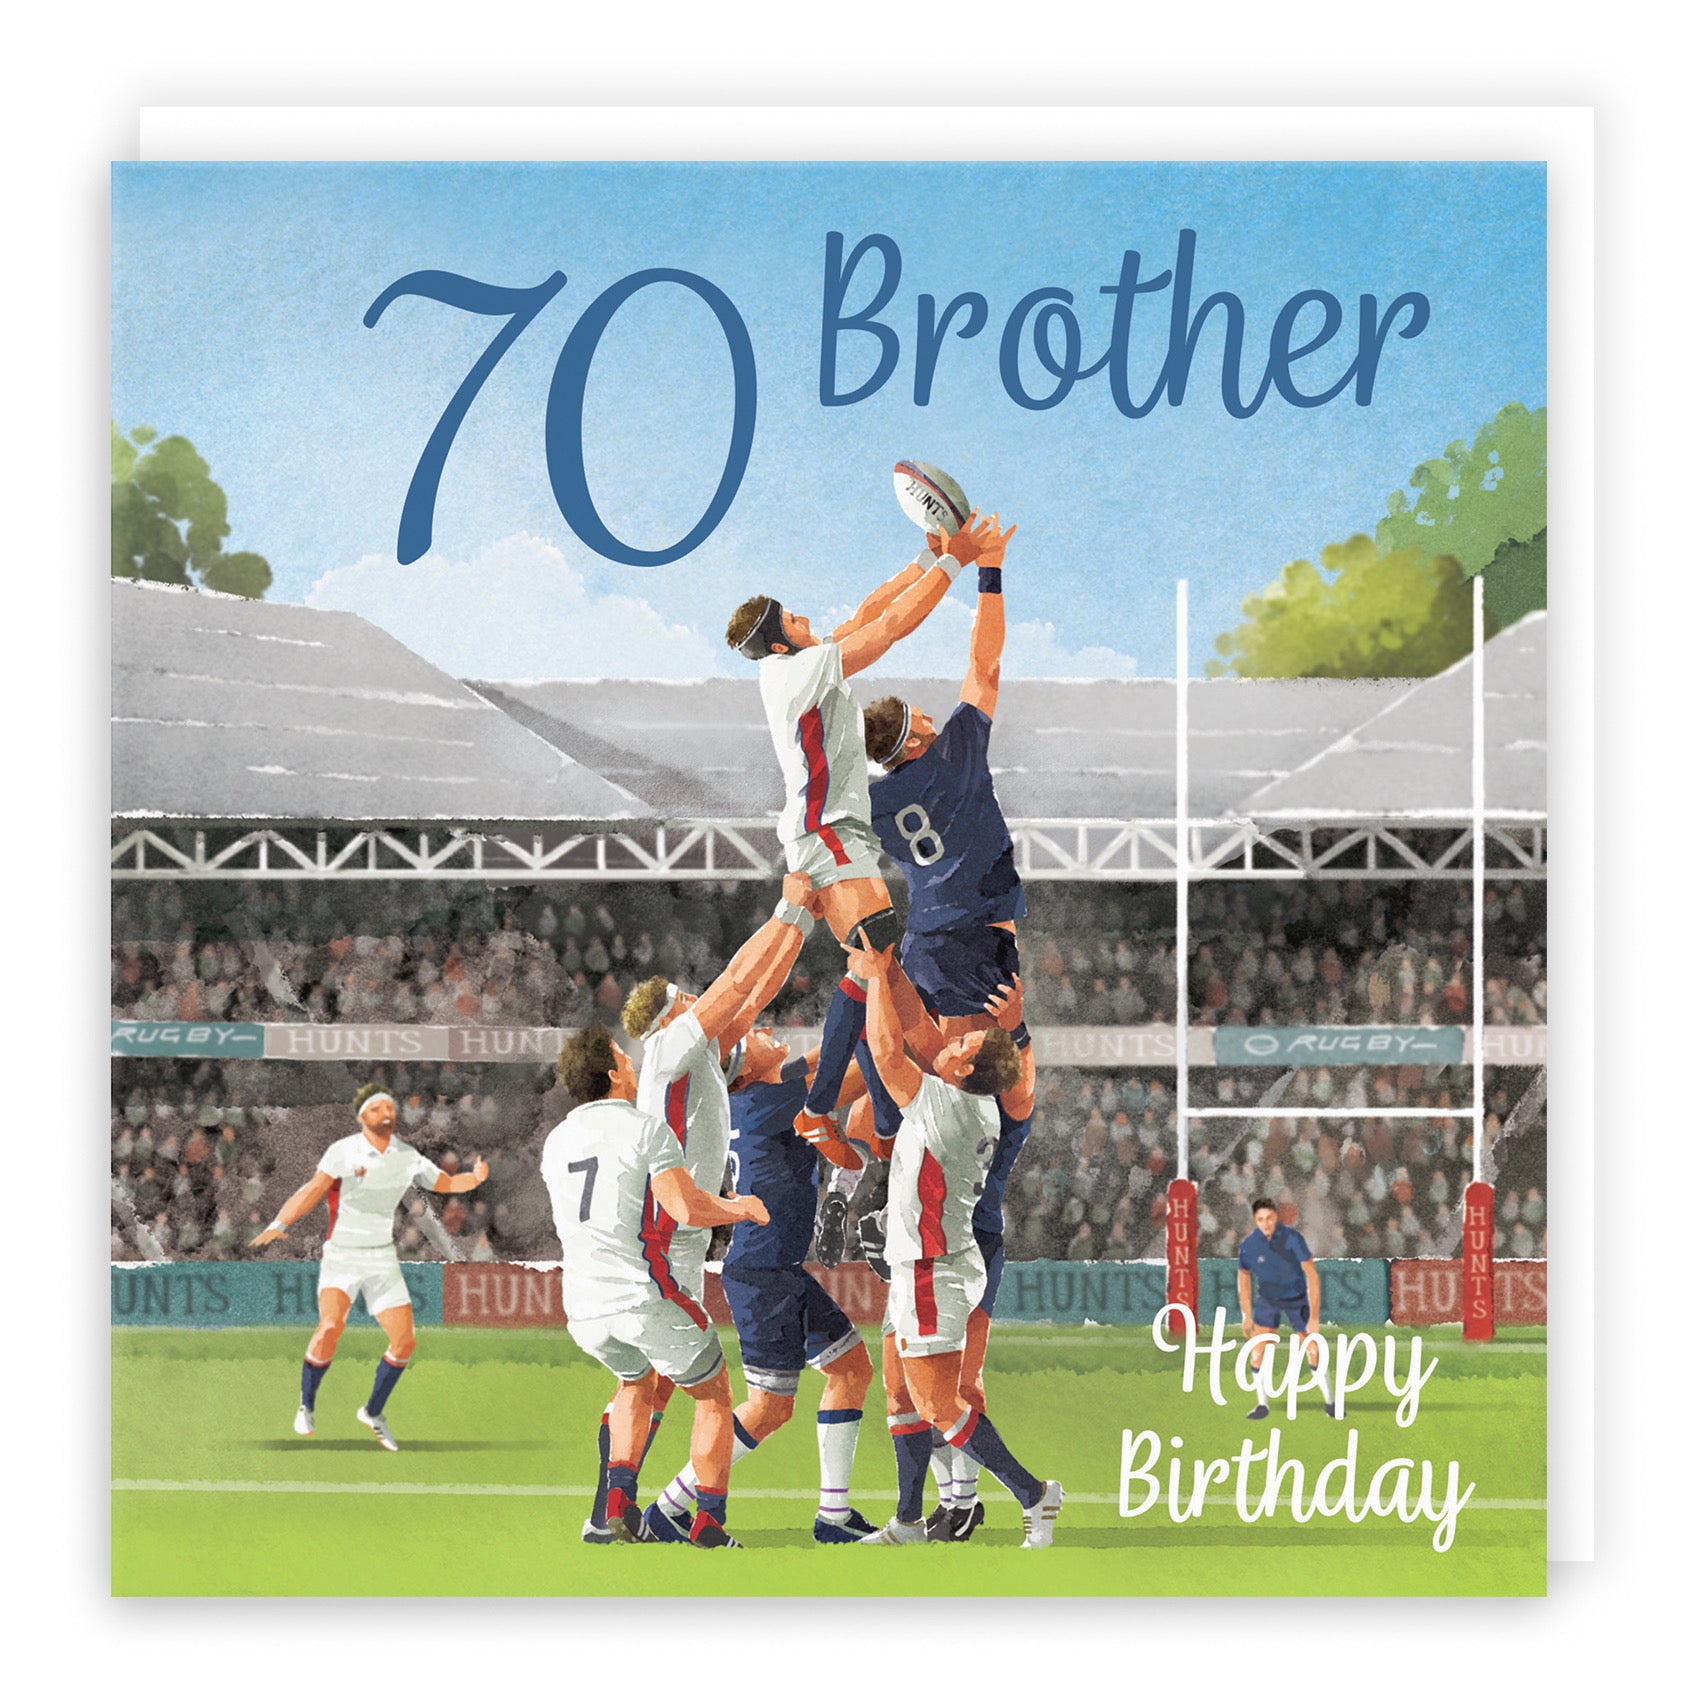 70th Brother Rugby Birthday Card Milo's Gallery - Default Title (B0CPR823DT)